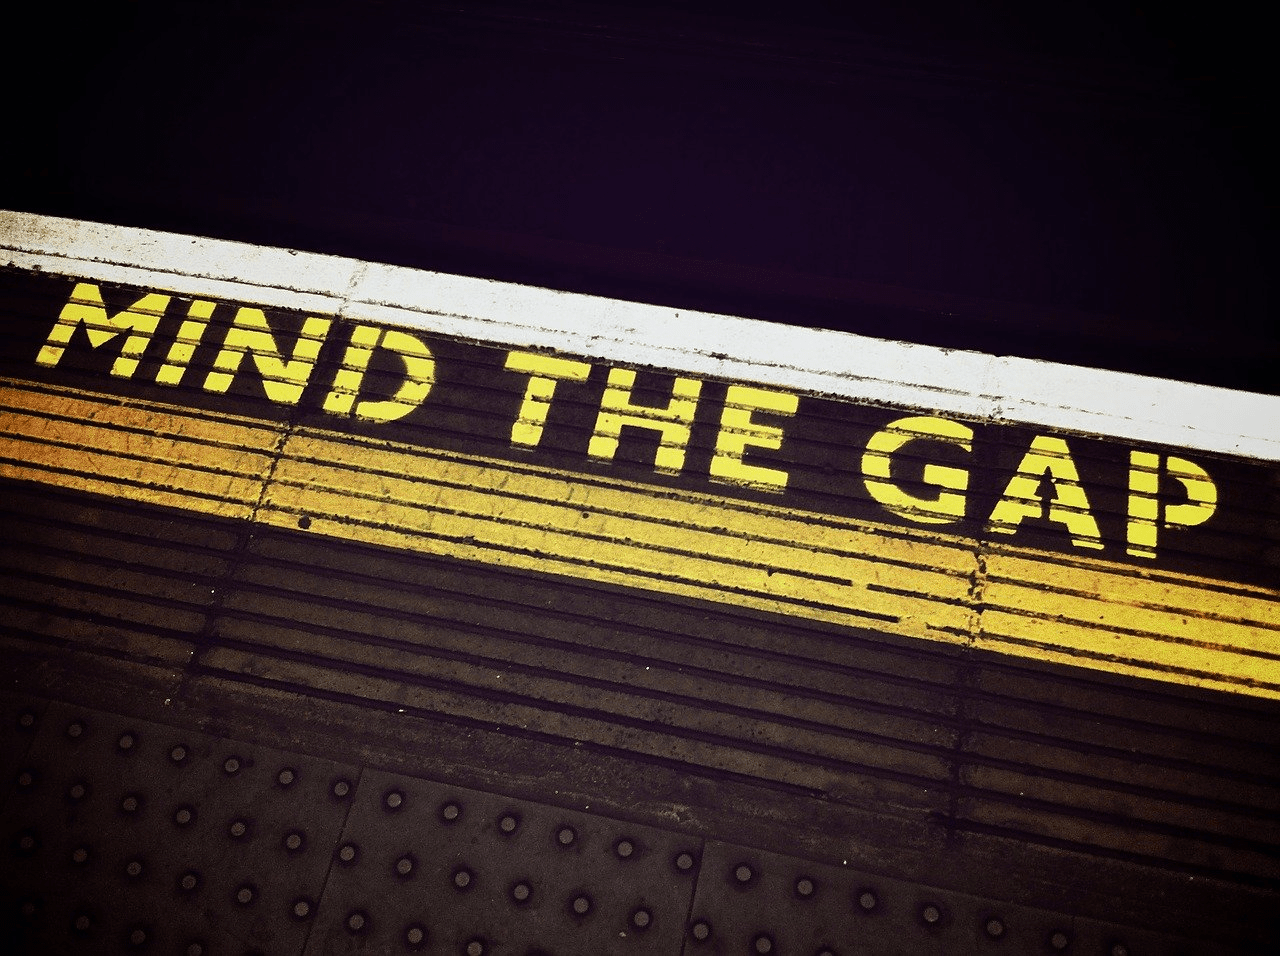 how to perform gap analysis